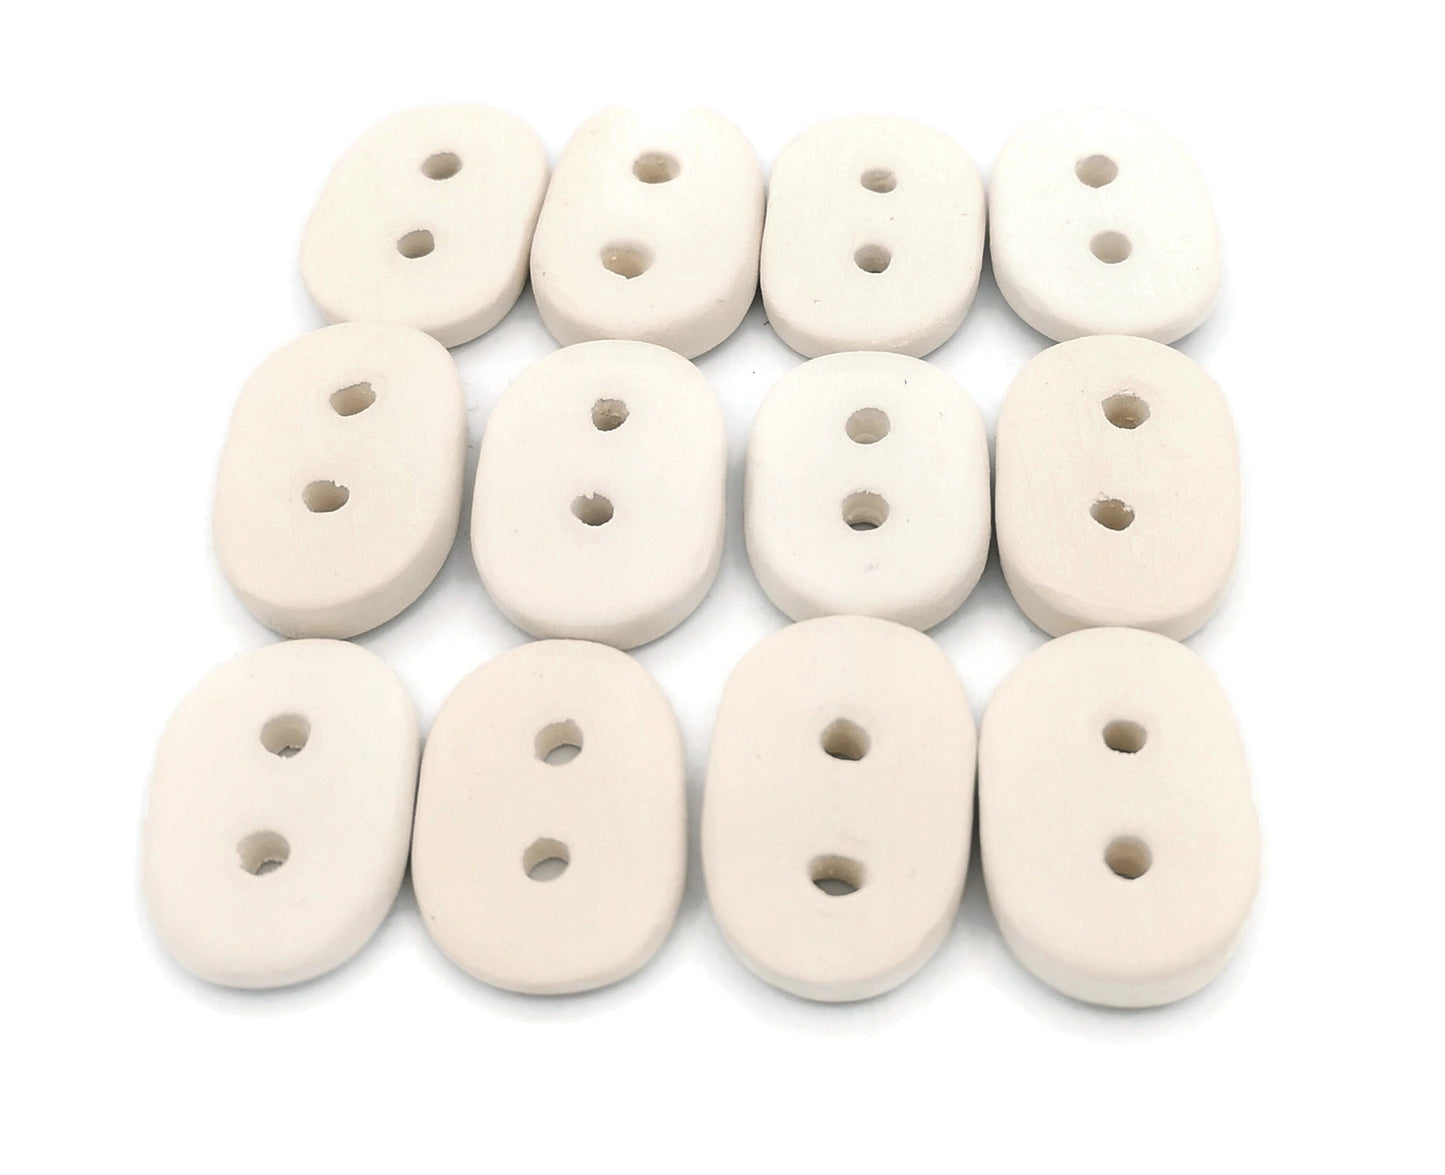 BLANK BUTTONS, CERAMIC Bisque Buttons Ready To Paint, 12 Pcs Large Buttons, Unpainted Coat Buttons, Handmade Sewing Supplies And Notions - Ceramica Ana Rafael